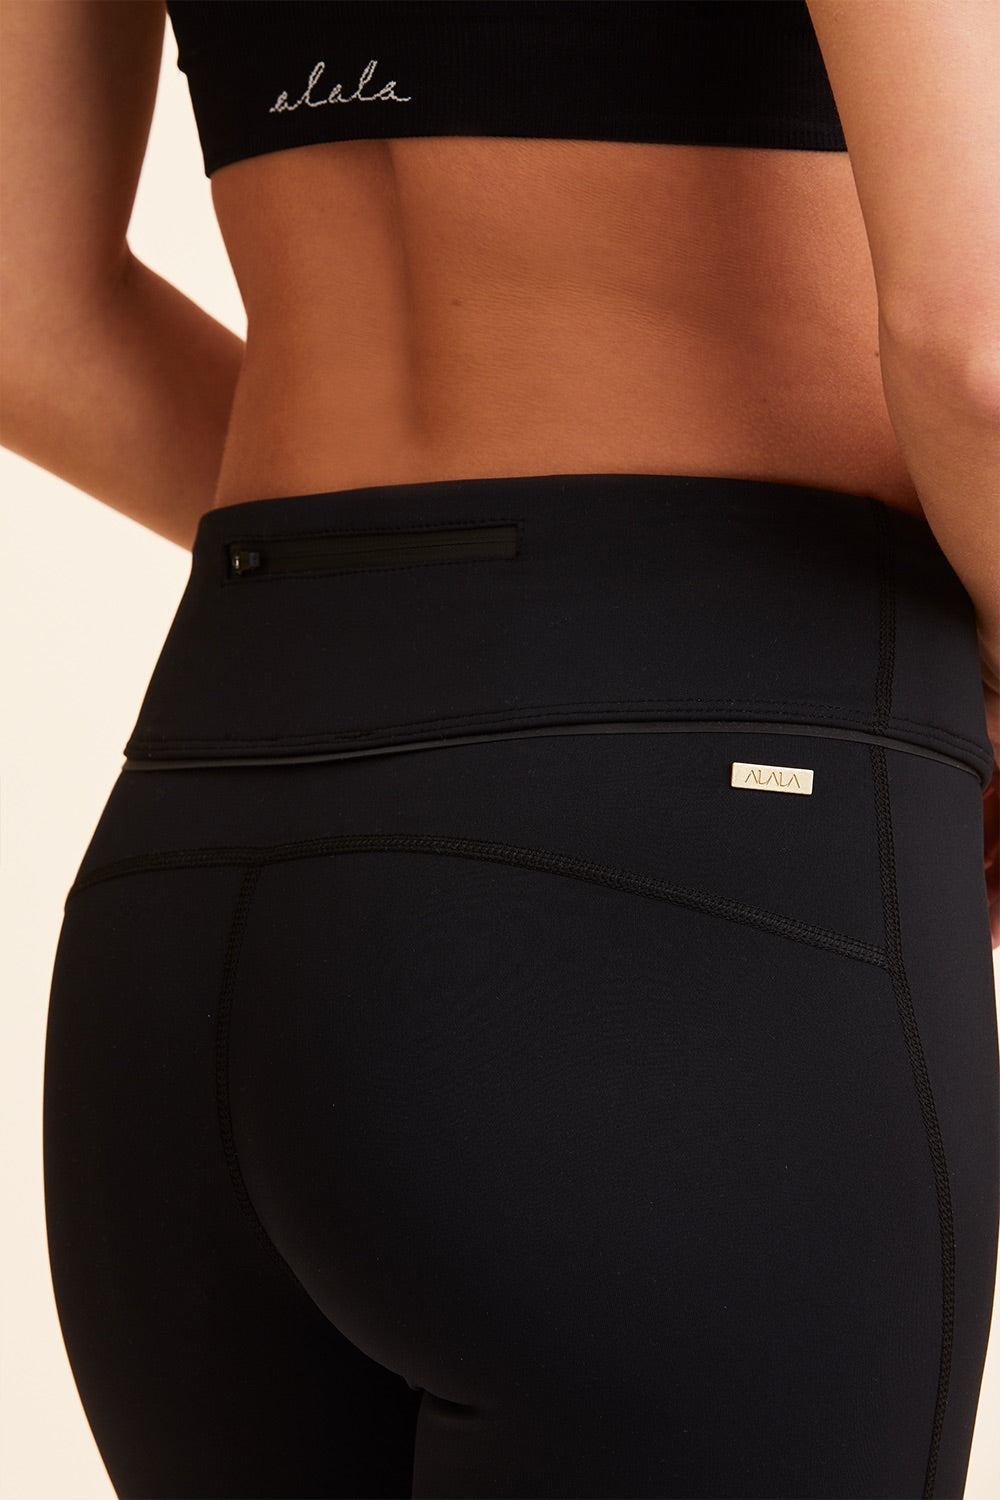 Back view close-up  of Alala Women's Luxury Athleisure cropped black and white tight with mesh paneling on back of knees.